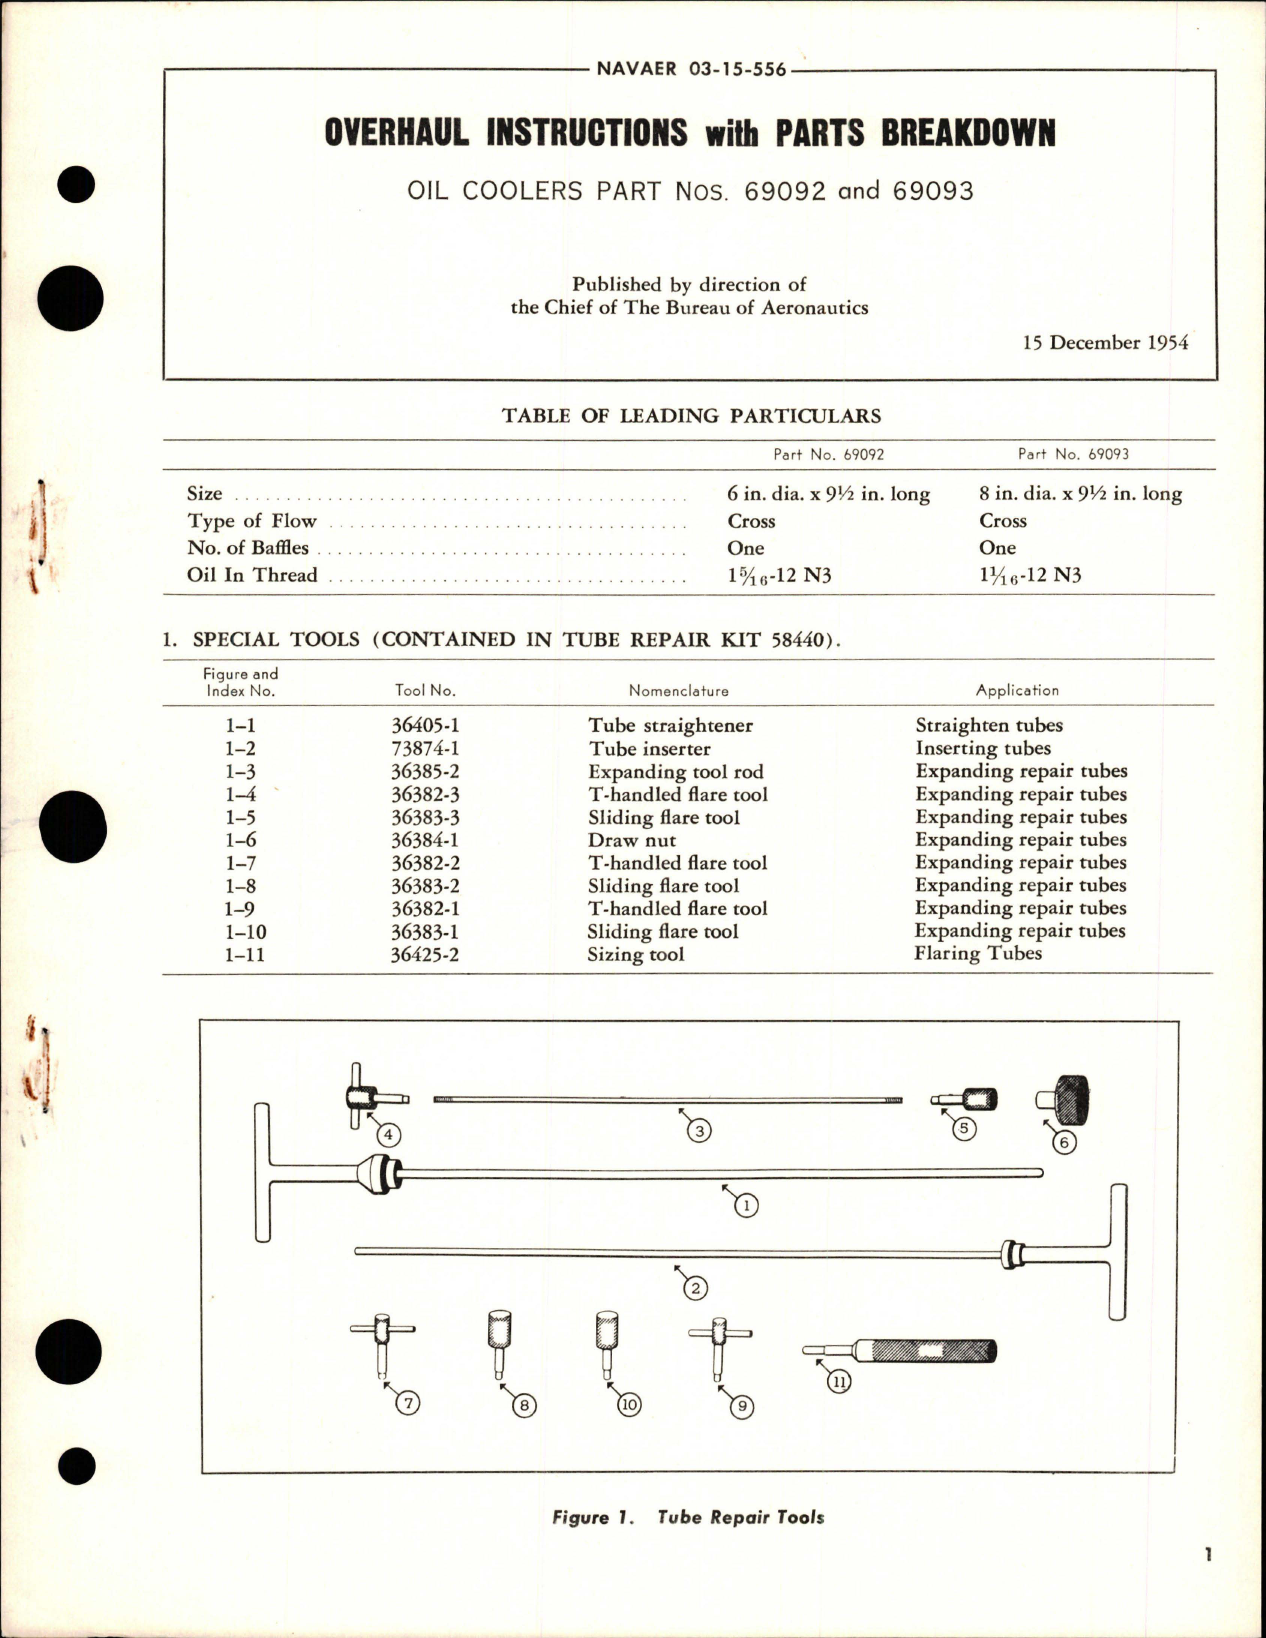 Sample page 1 from AirCorps Library document: Overhaul Instructions with Parts for Oil Coolers - Parts 69092 and 69093